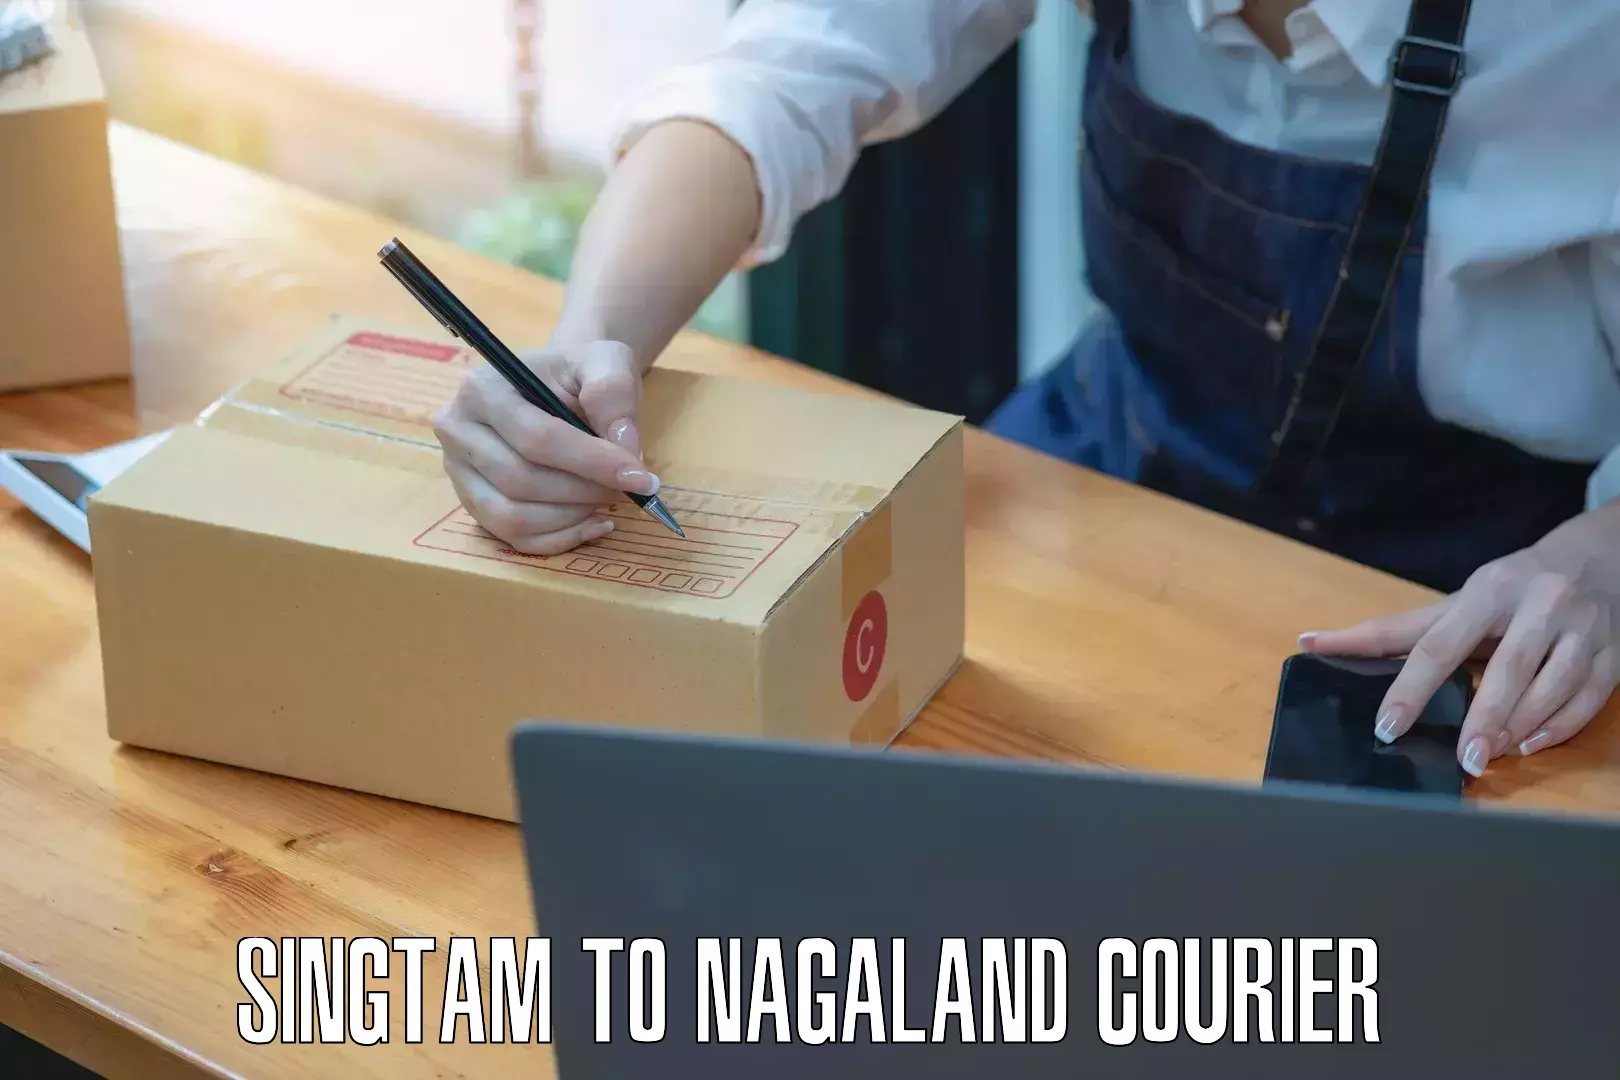 State-of-the-art courier technology Singtam to Nagaland